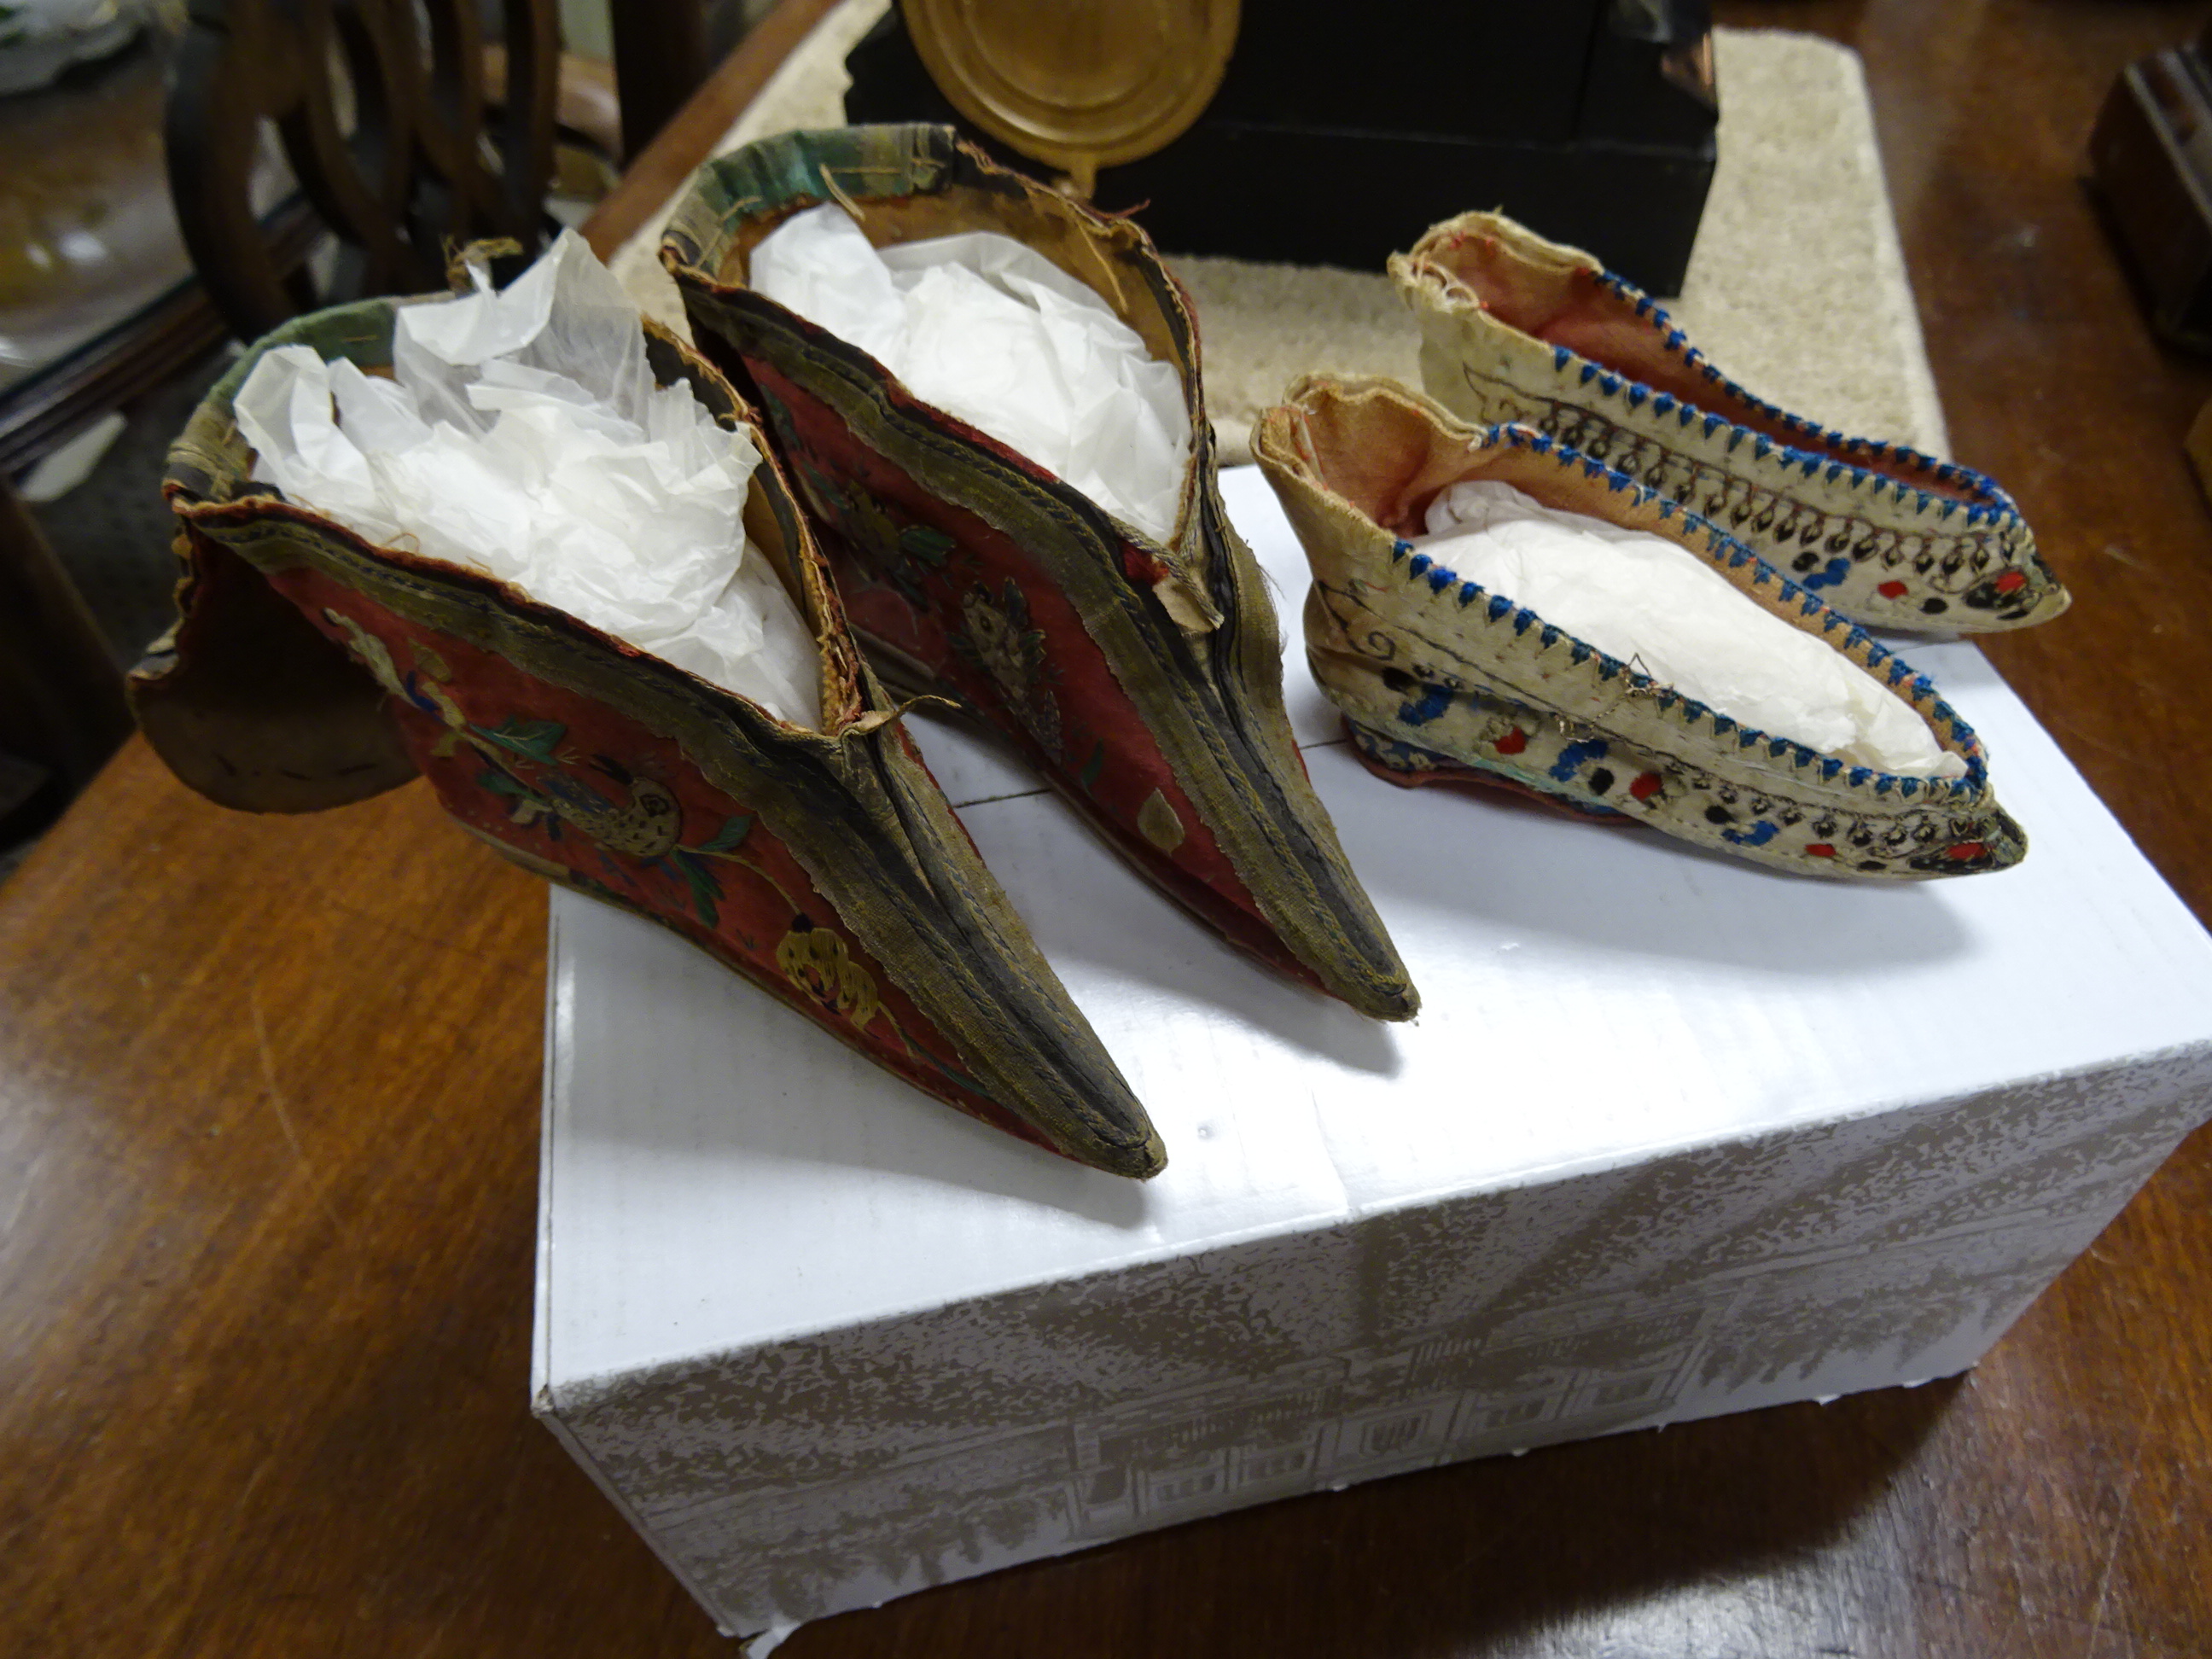 Pair of Antique Chinese Silk Embroidered Shoes / Slippers together with another similar pair